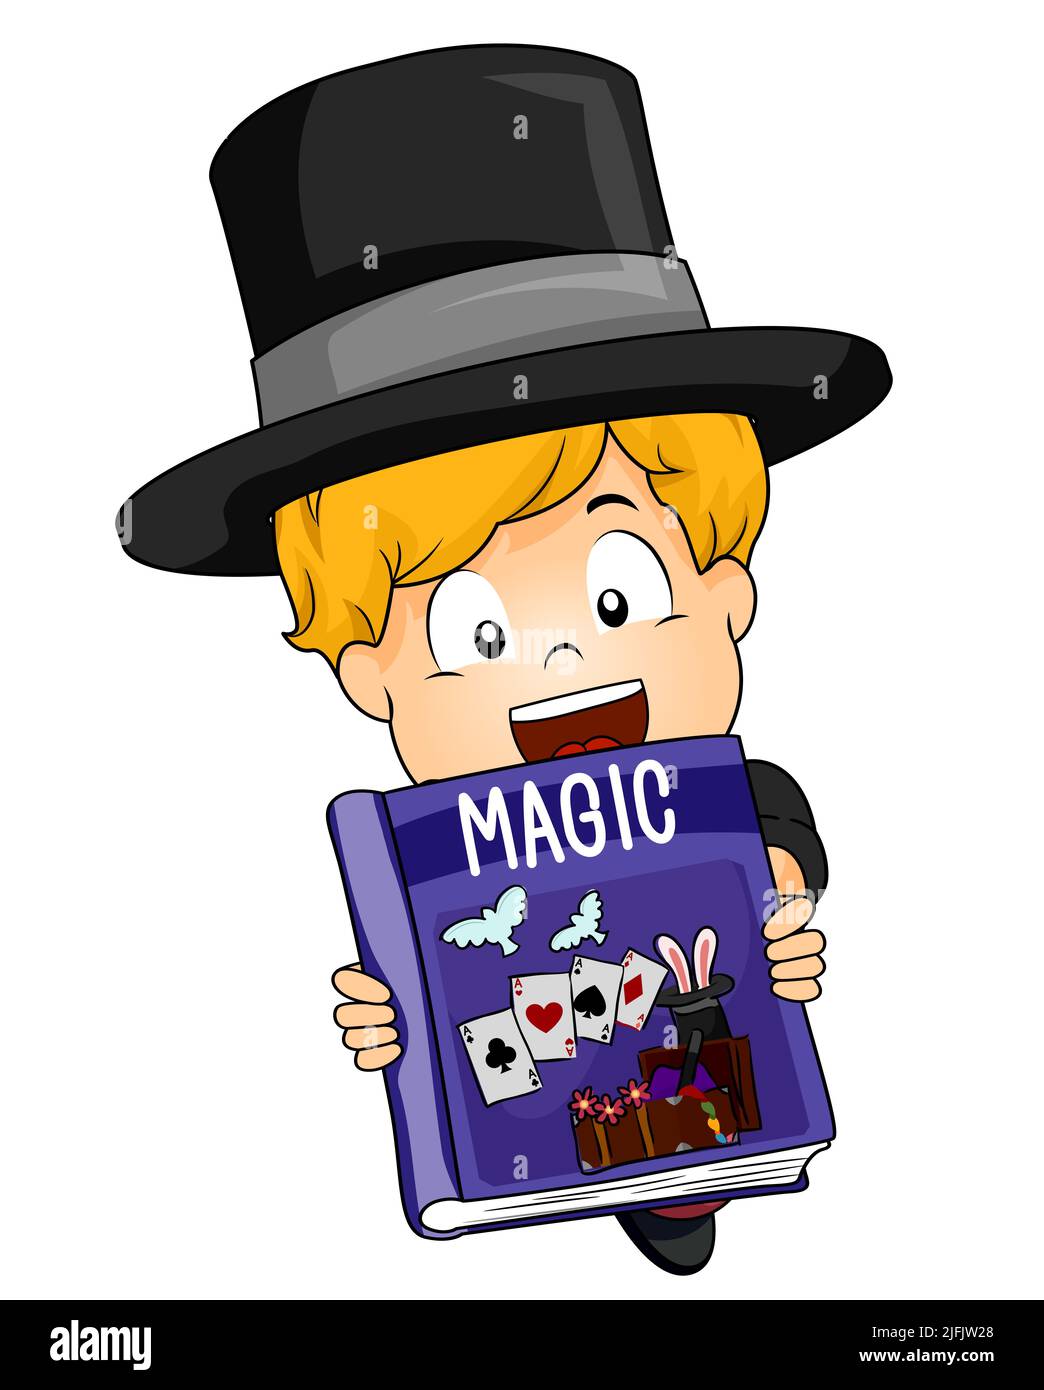 Illustration of a Kid Boy Magician Wearing Top Hat, Holding and Showing A Magic Book with Cards, Bird and Bunny Ears on Cover Stock Photo